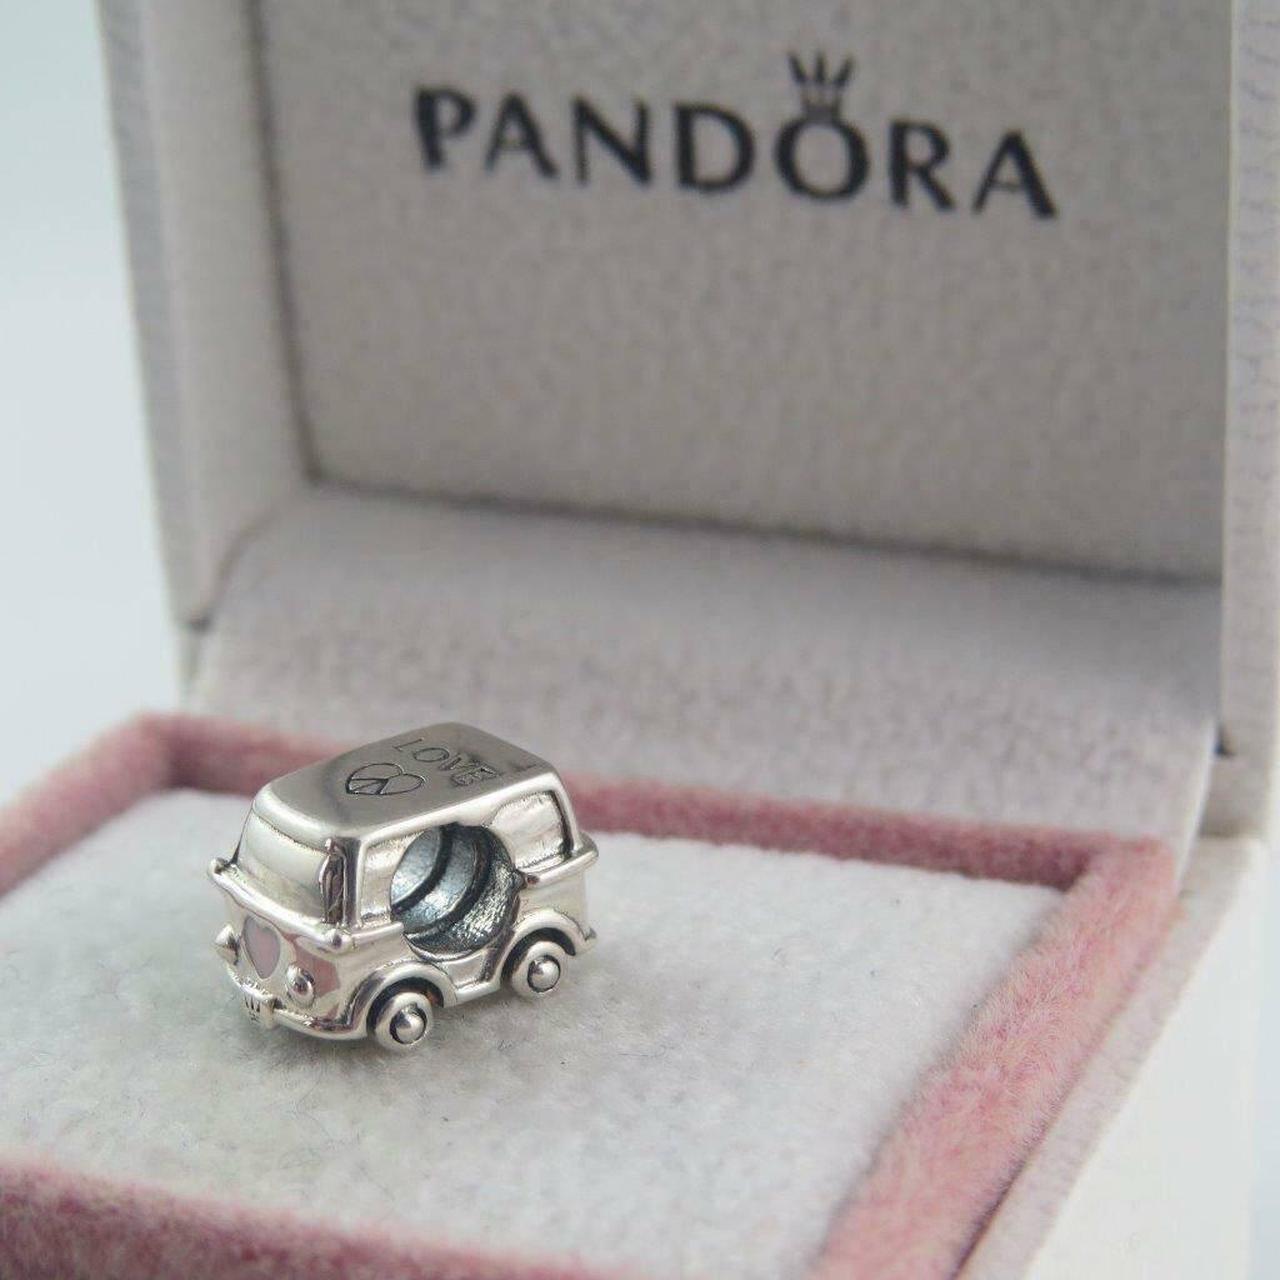 Pandora Camper Van Charm, If you can't find your